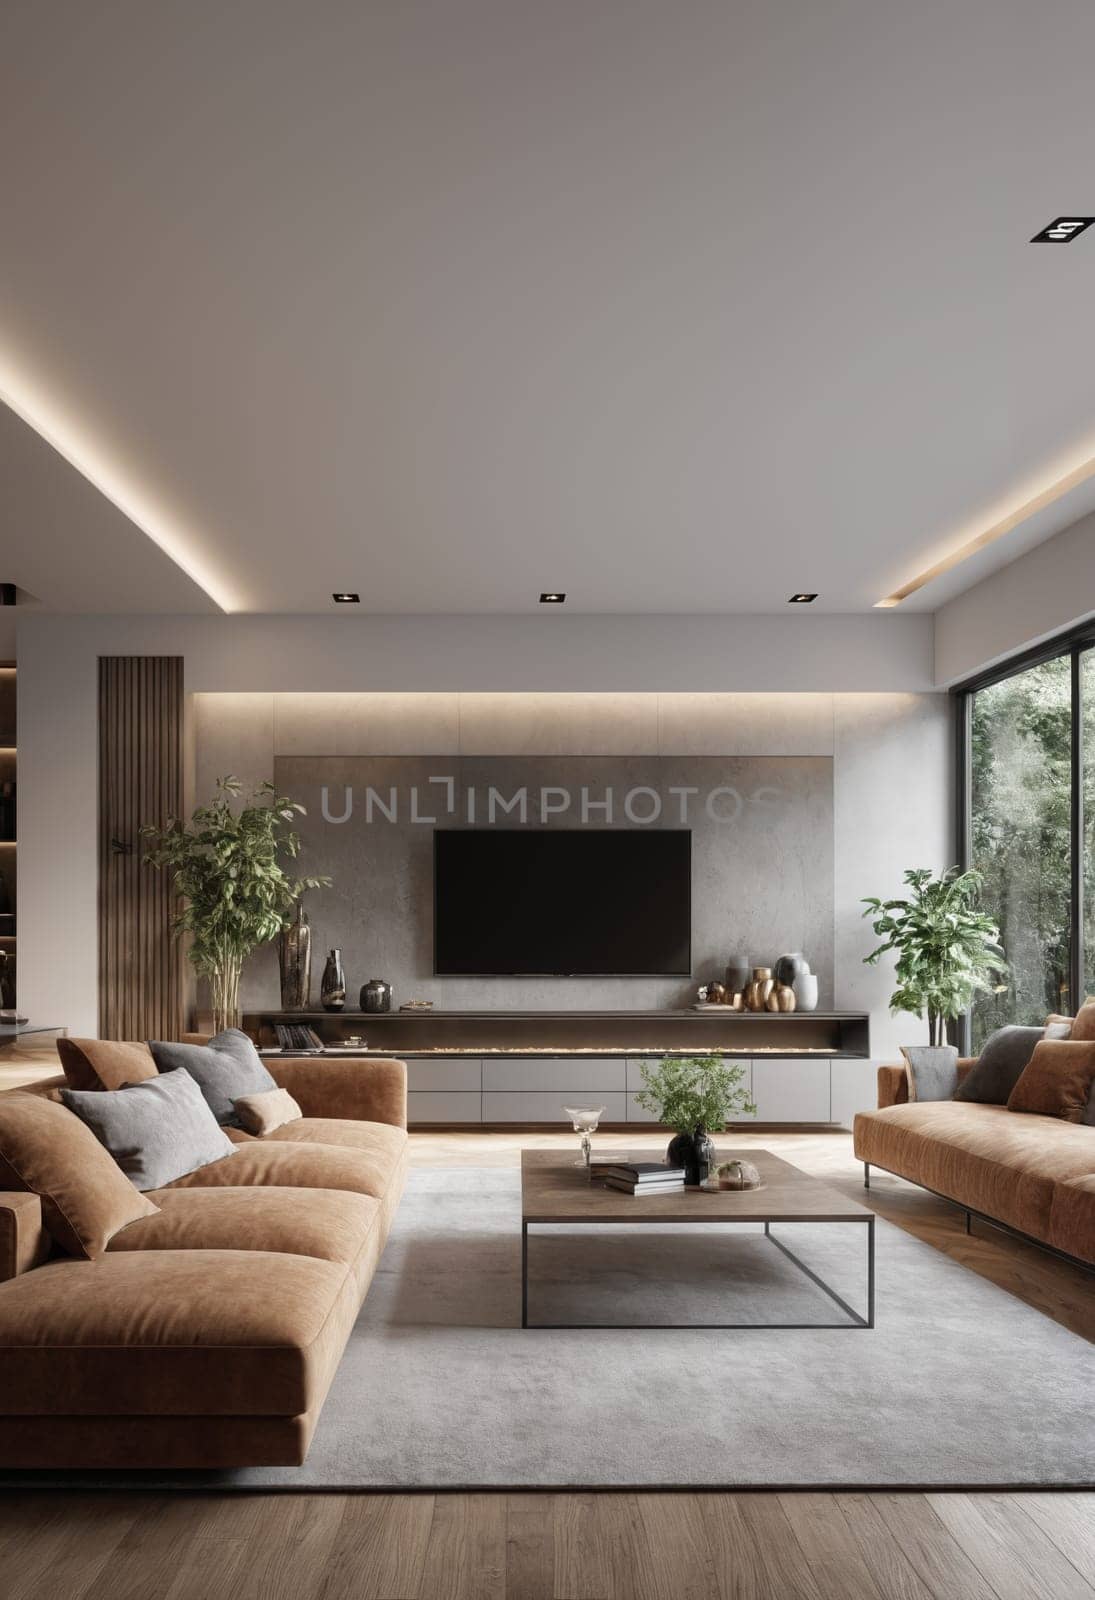 interior of modern bright living room with grey sofa 3d render.